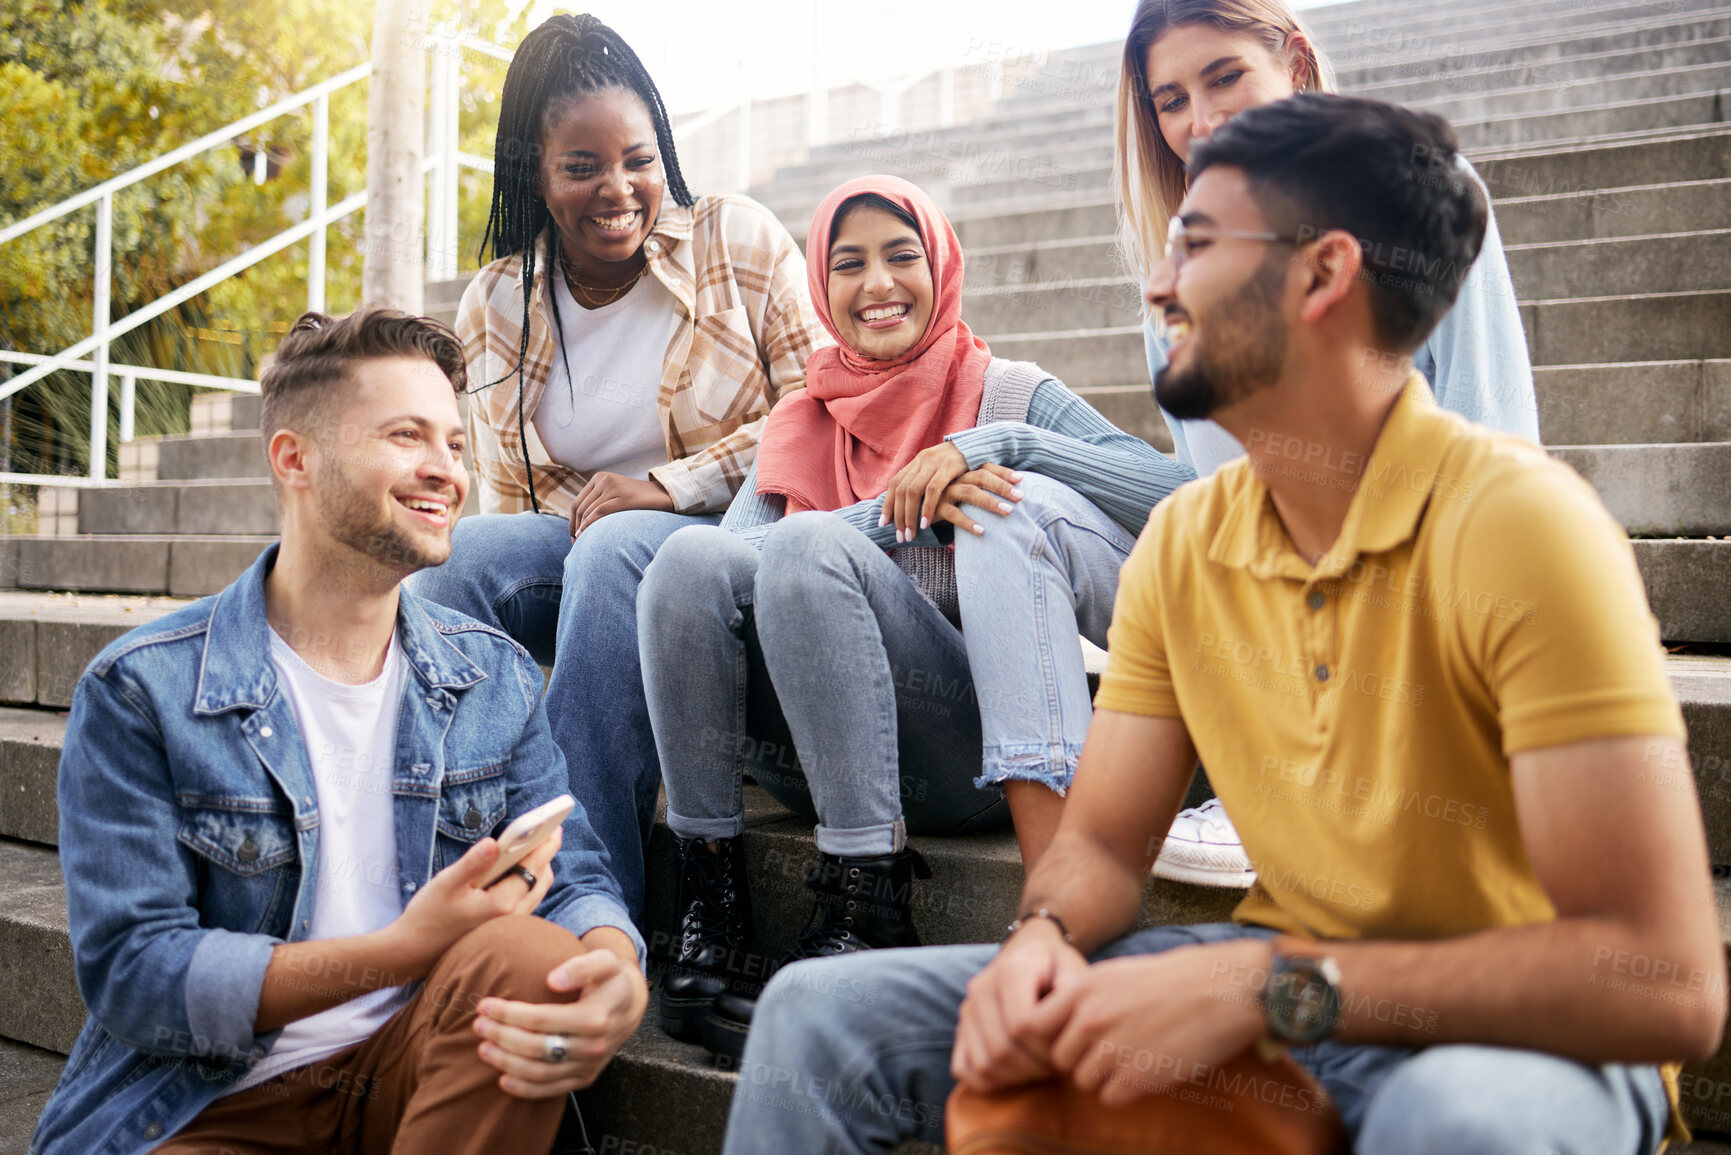 Buy stock photo Relax, diversity or students on steps at break talking or speaking of goals, education or future plan. Group, school or happy friends in university or college bonding in a fun social conversation